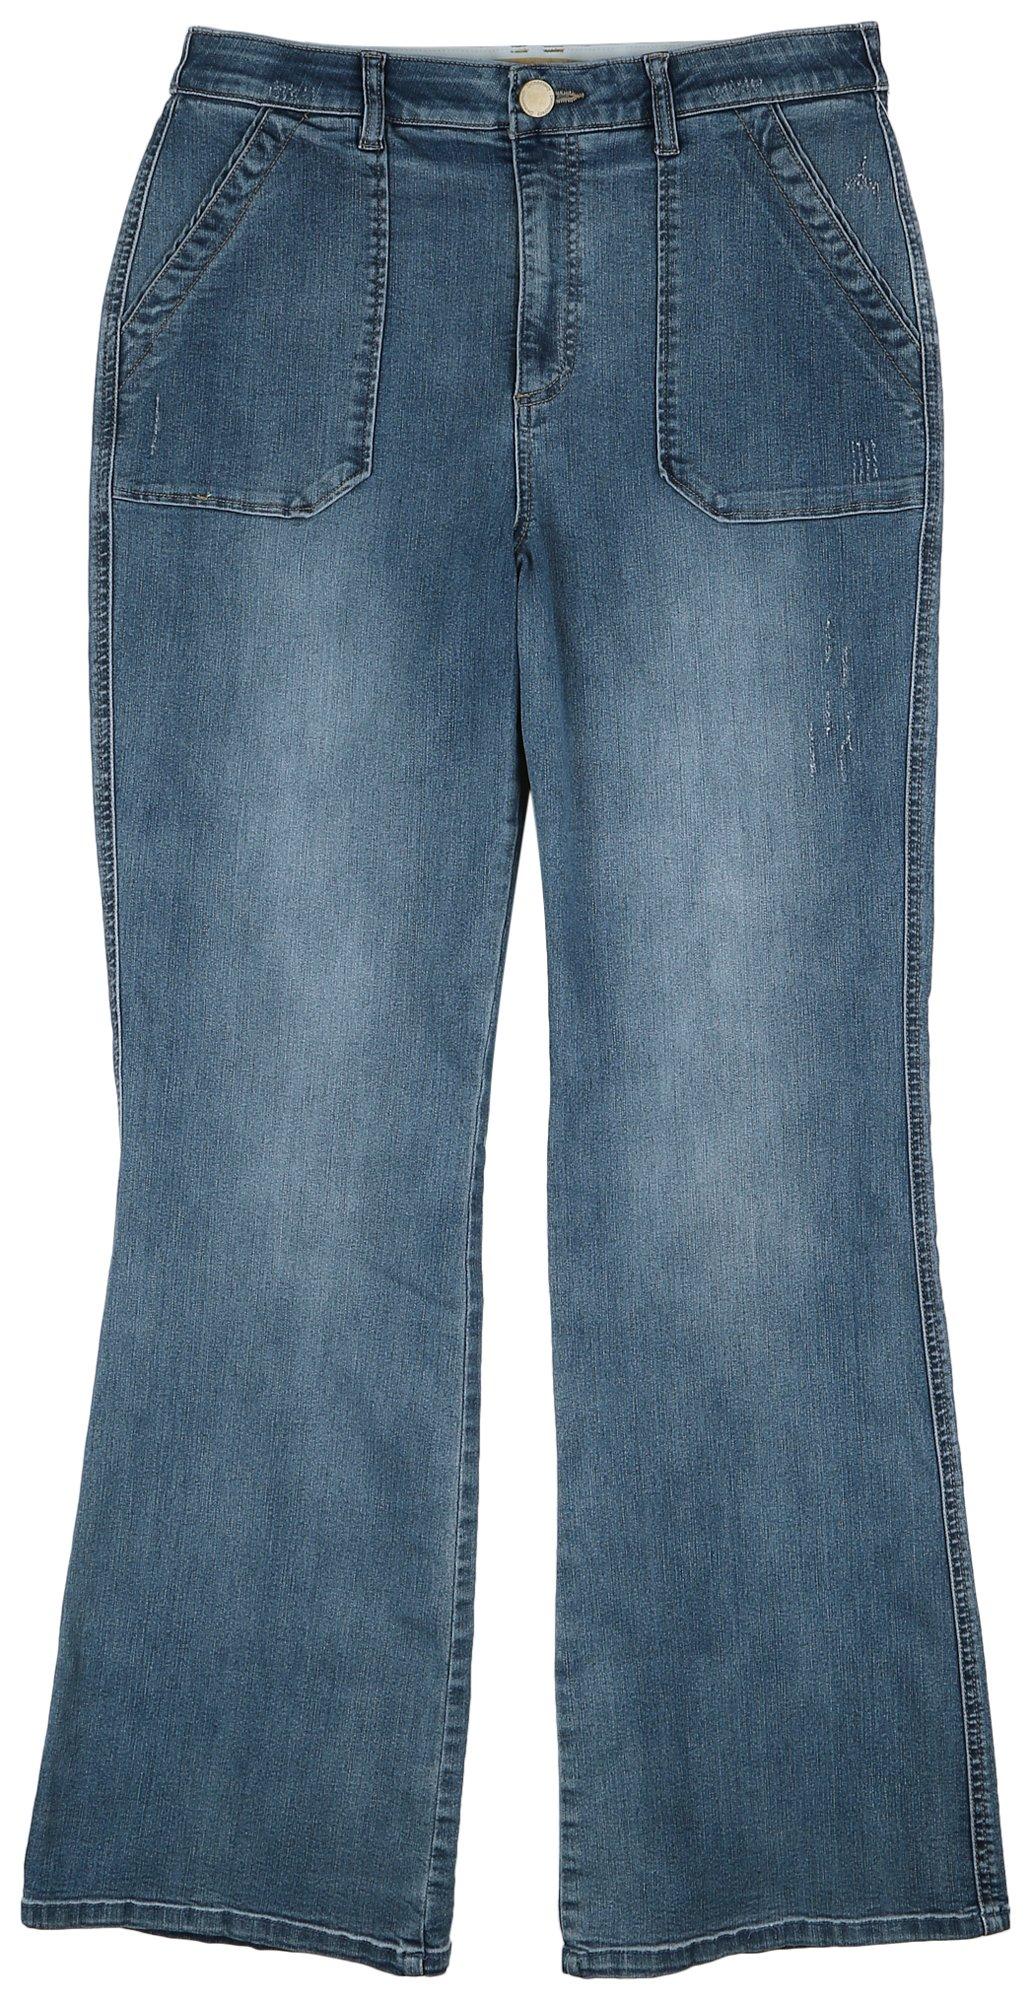 Womens Denim 33 in. Ab-technology Skyrise Jeans